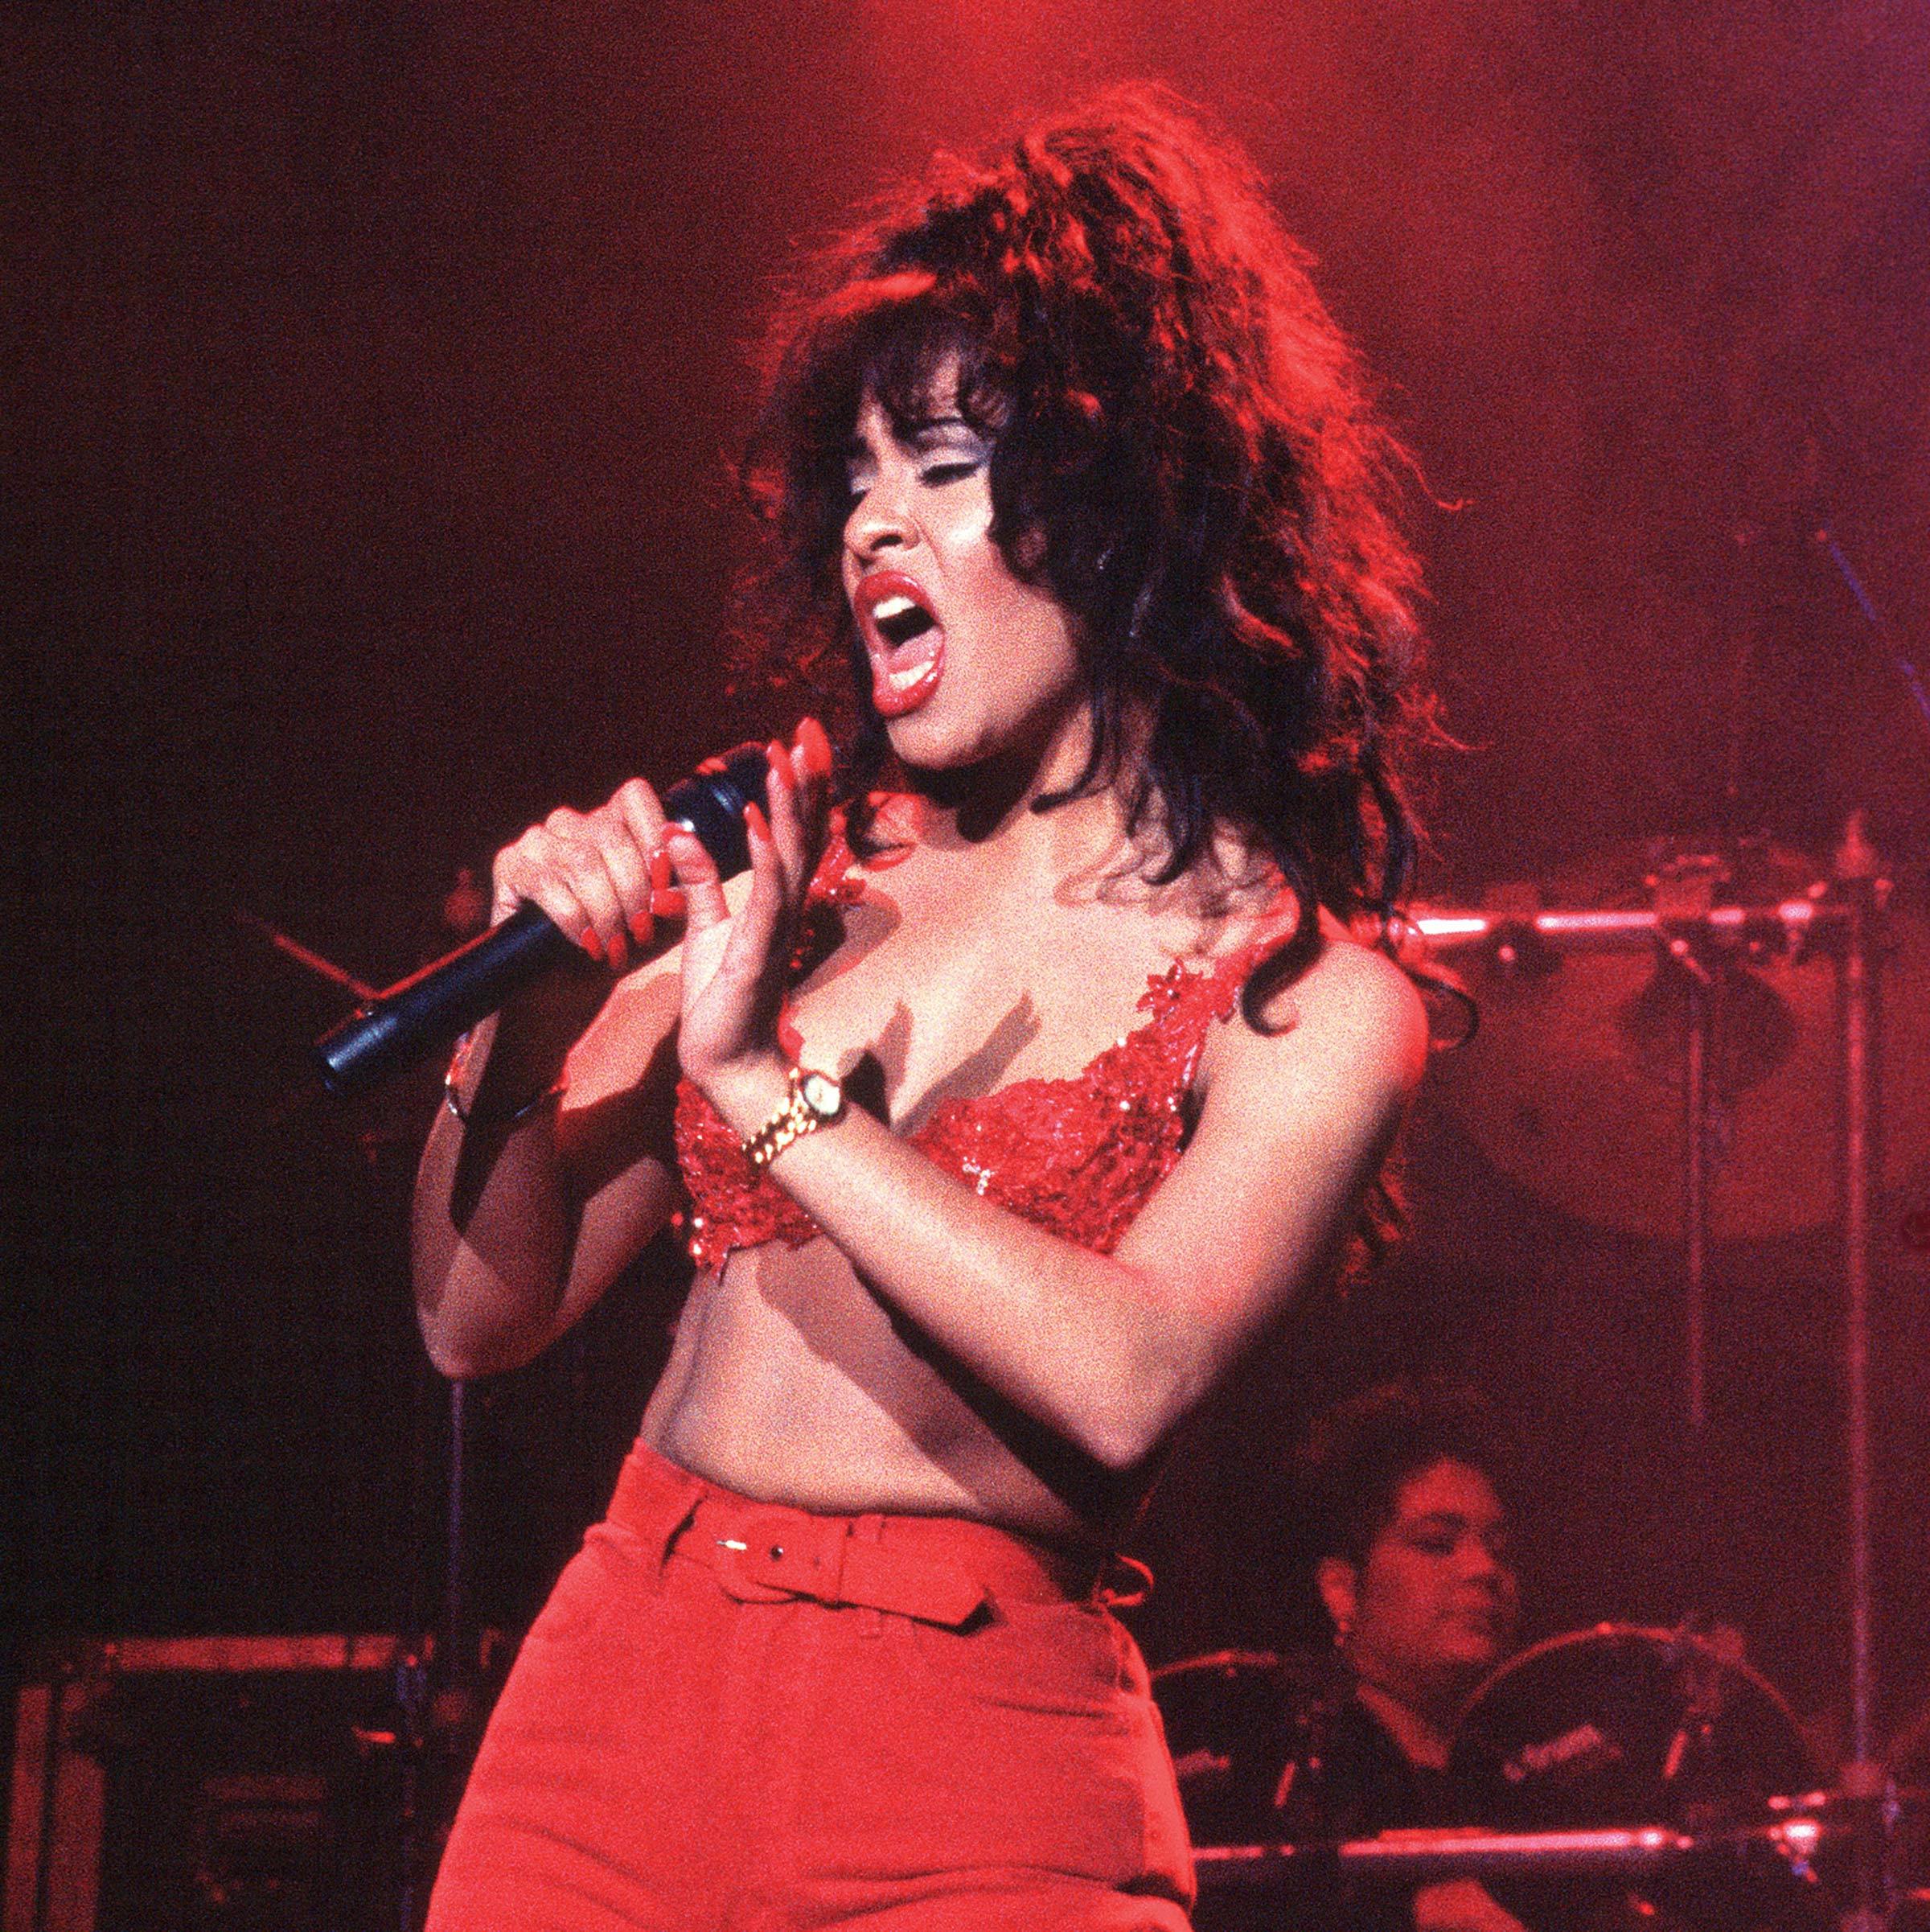 Selena, with a teased updo, performing in San Antonio after hosting a fashion show, on December 3, 1994.